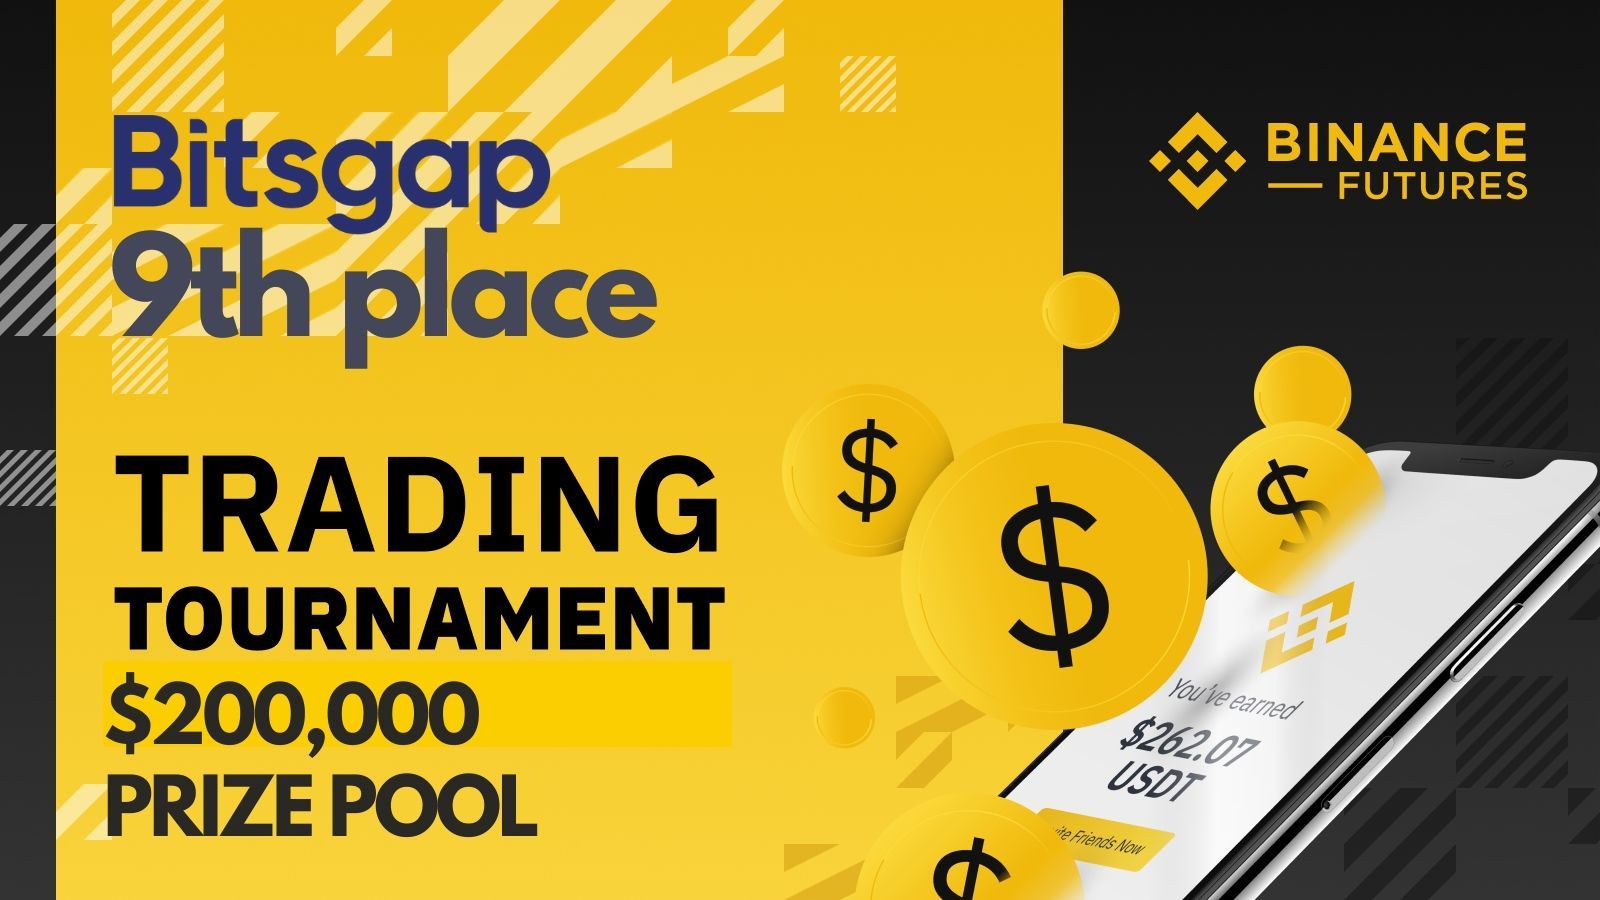 Bitsgap is in the TOP 10 in the Global Binance Tournament